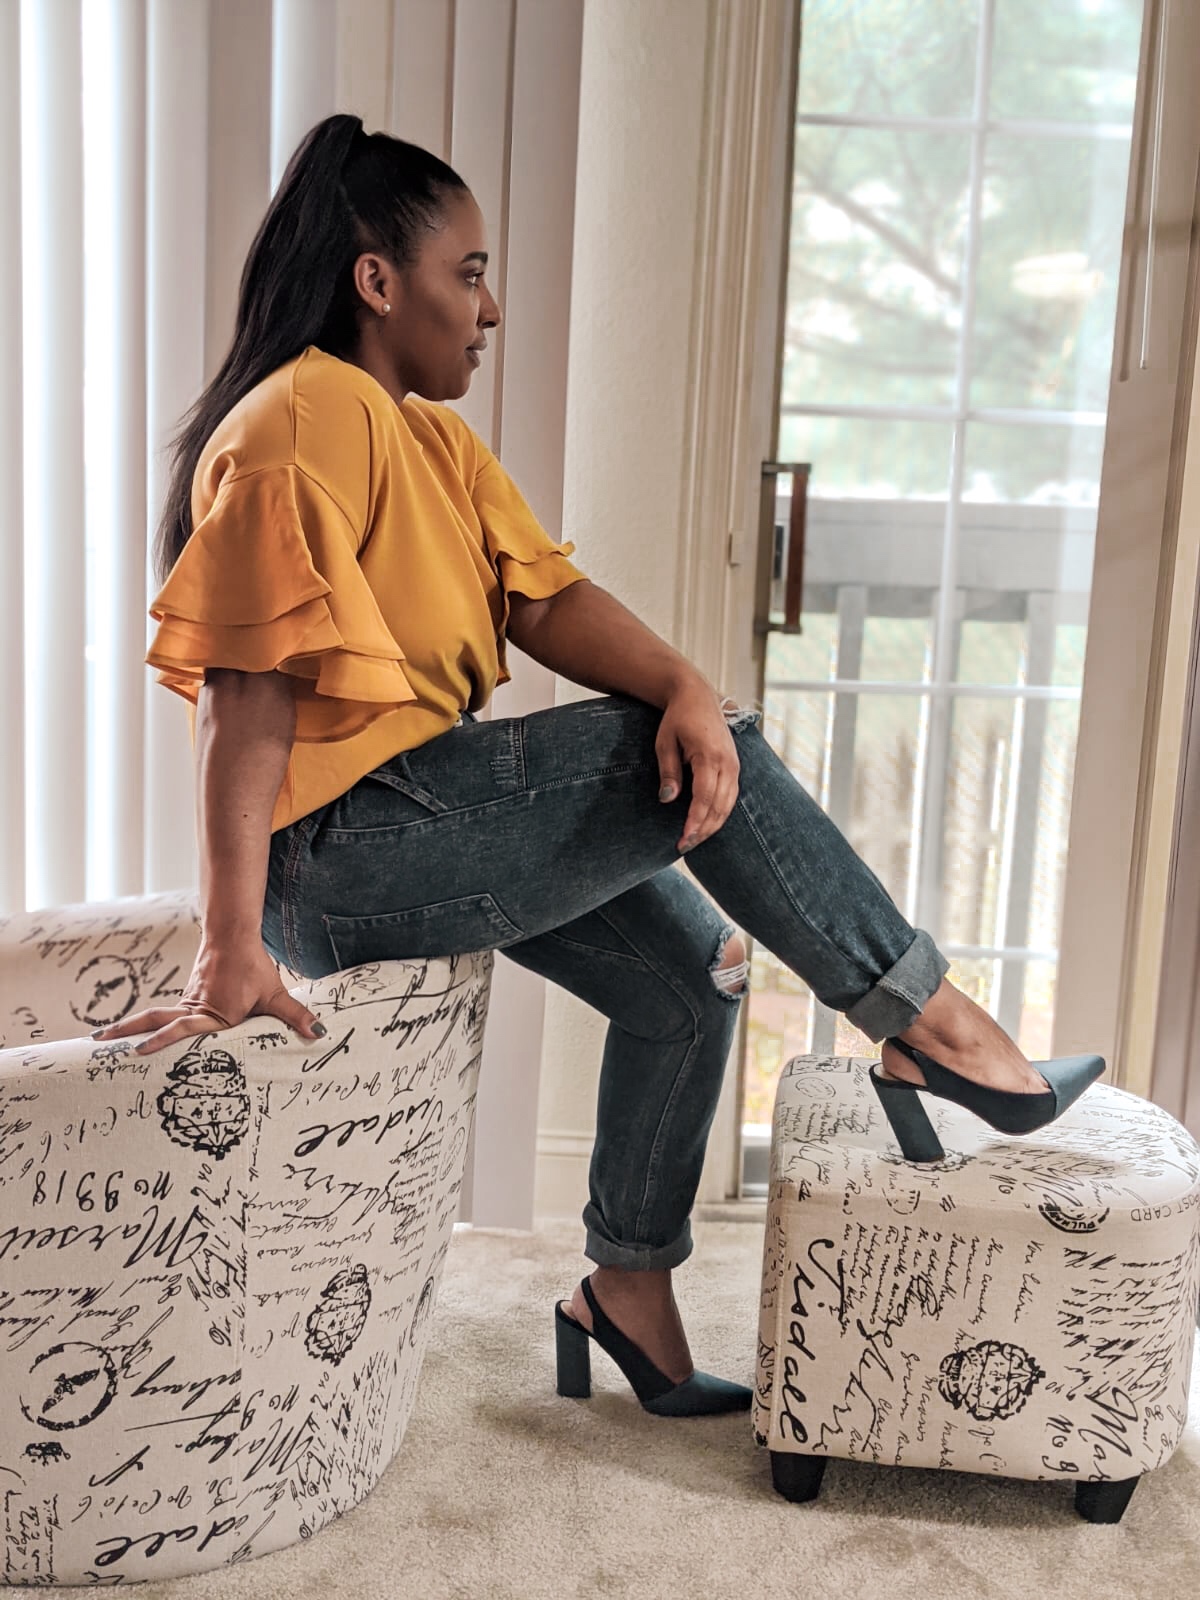 Lookbook store, stylish at home, shoedazzle shoes, denim mules, spring shoes, ruffle sleeves top, spring outfit ideas, summer outfit ideas, how to style denim